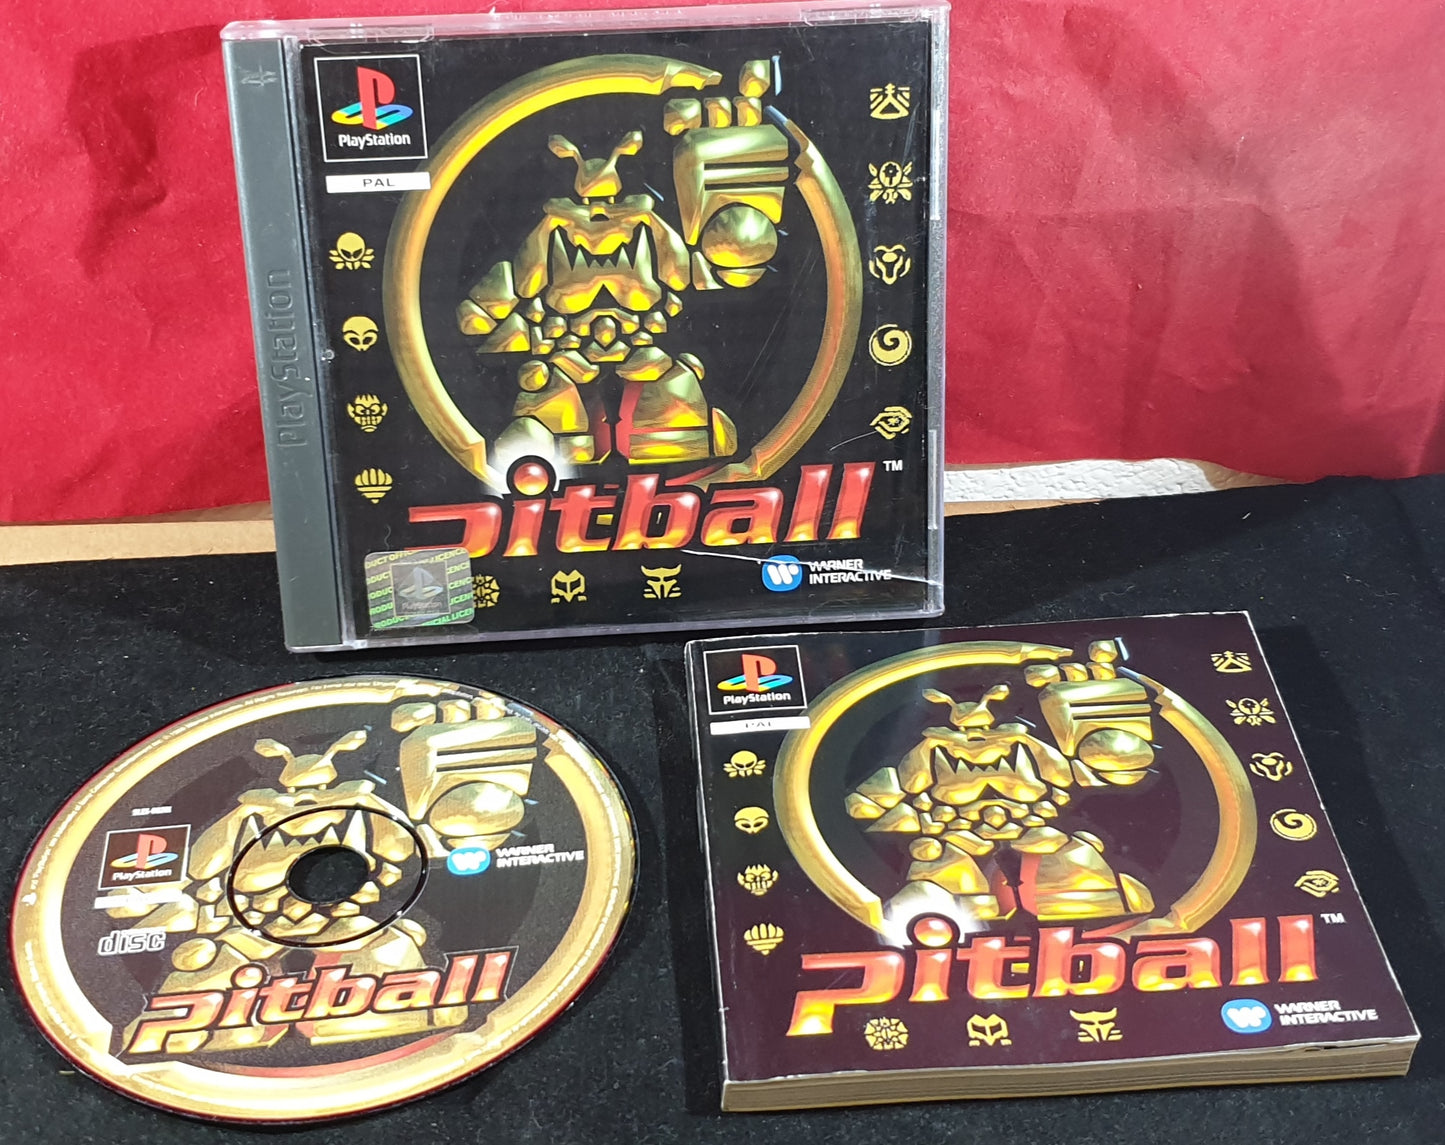 Pitball with Manual Sony Playstation 1 (PS1) Game